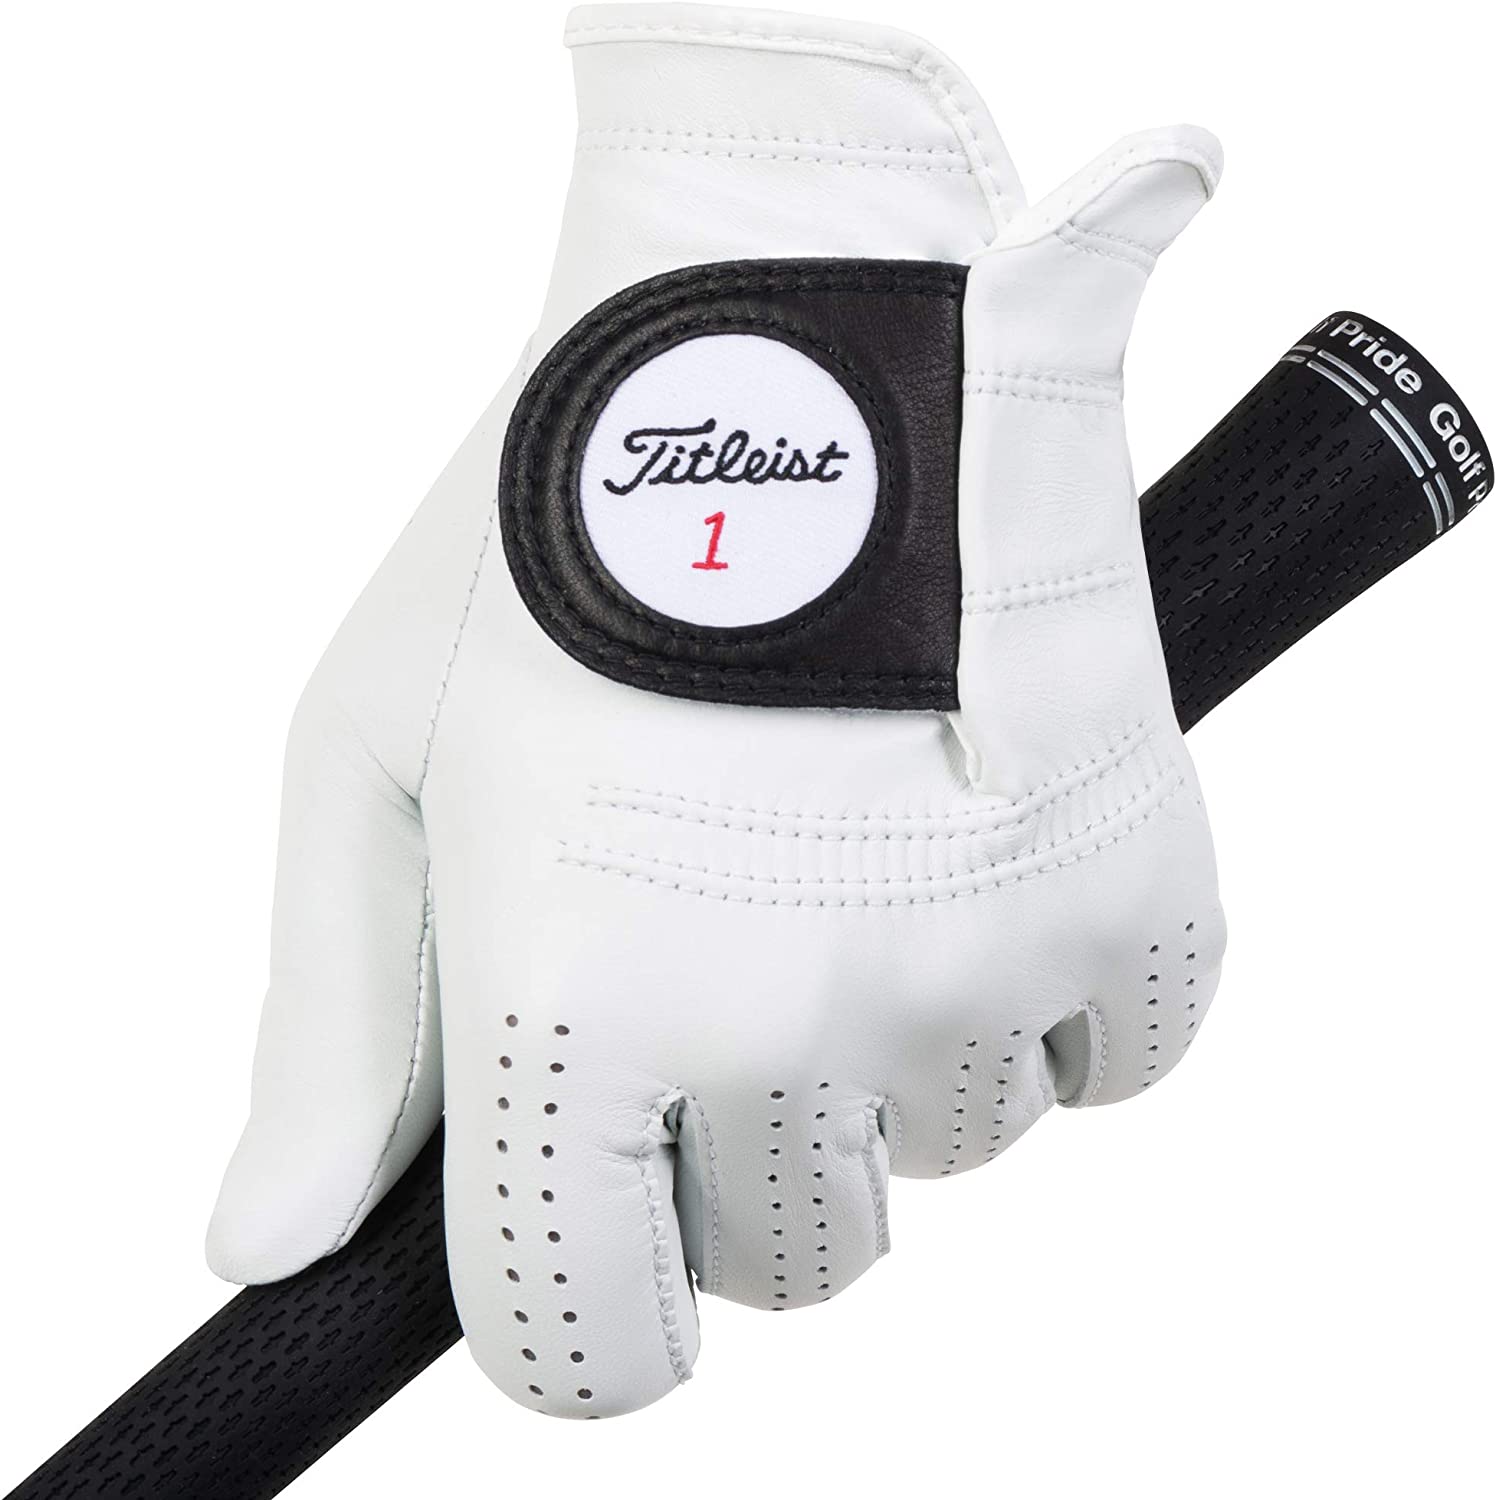 Titleist Players Men's Golf Glove Left X-Large (worn on left hand) - image 2 of 4